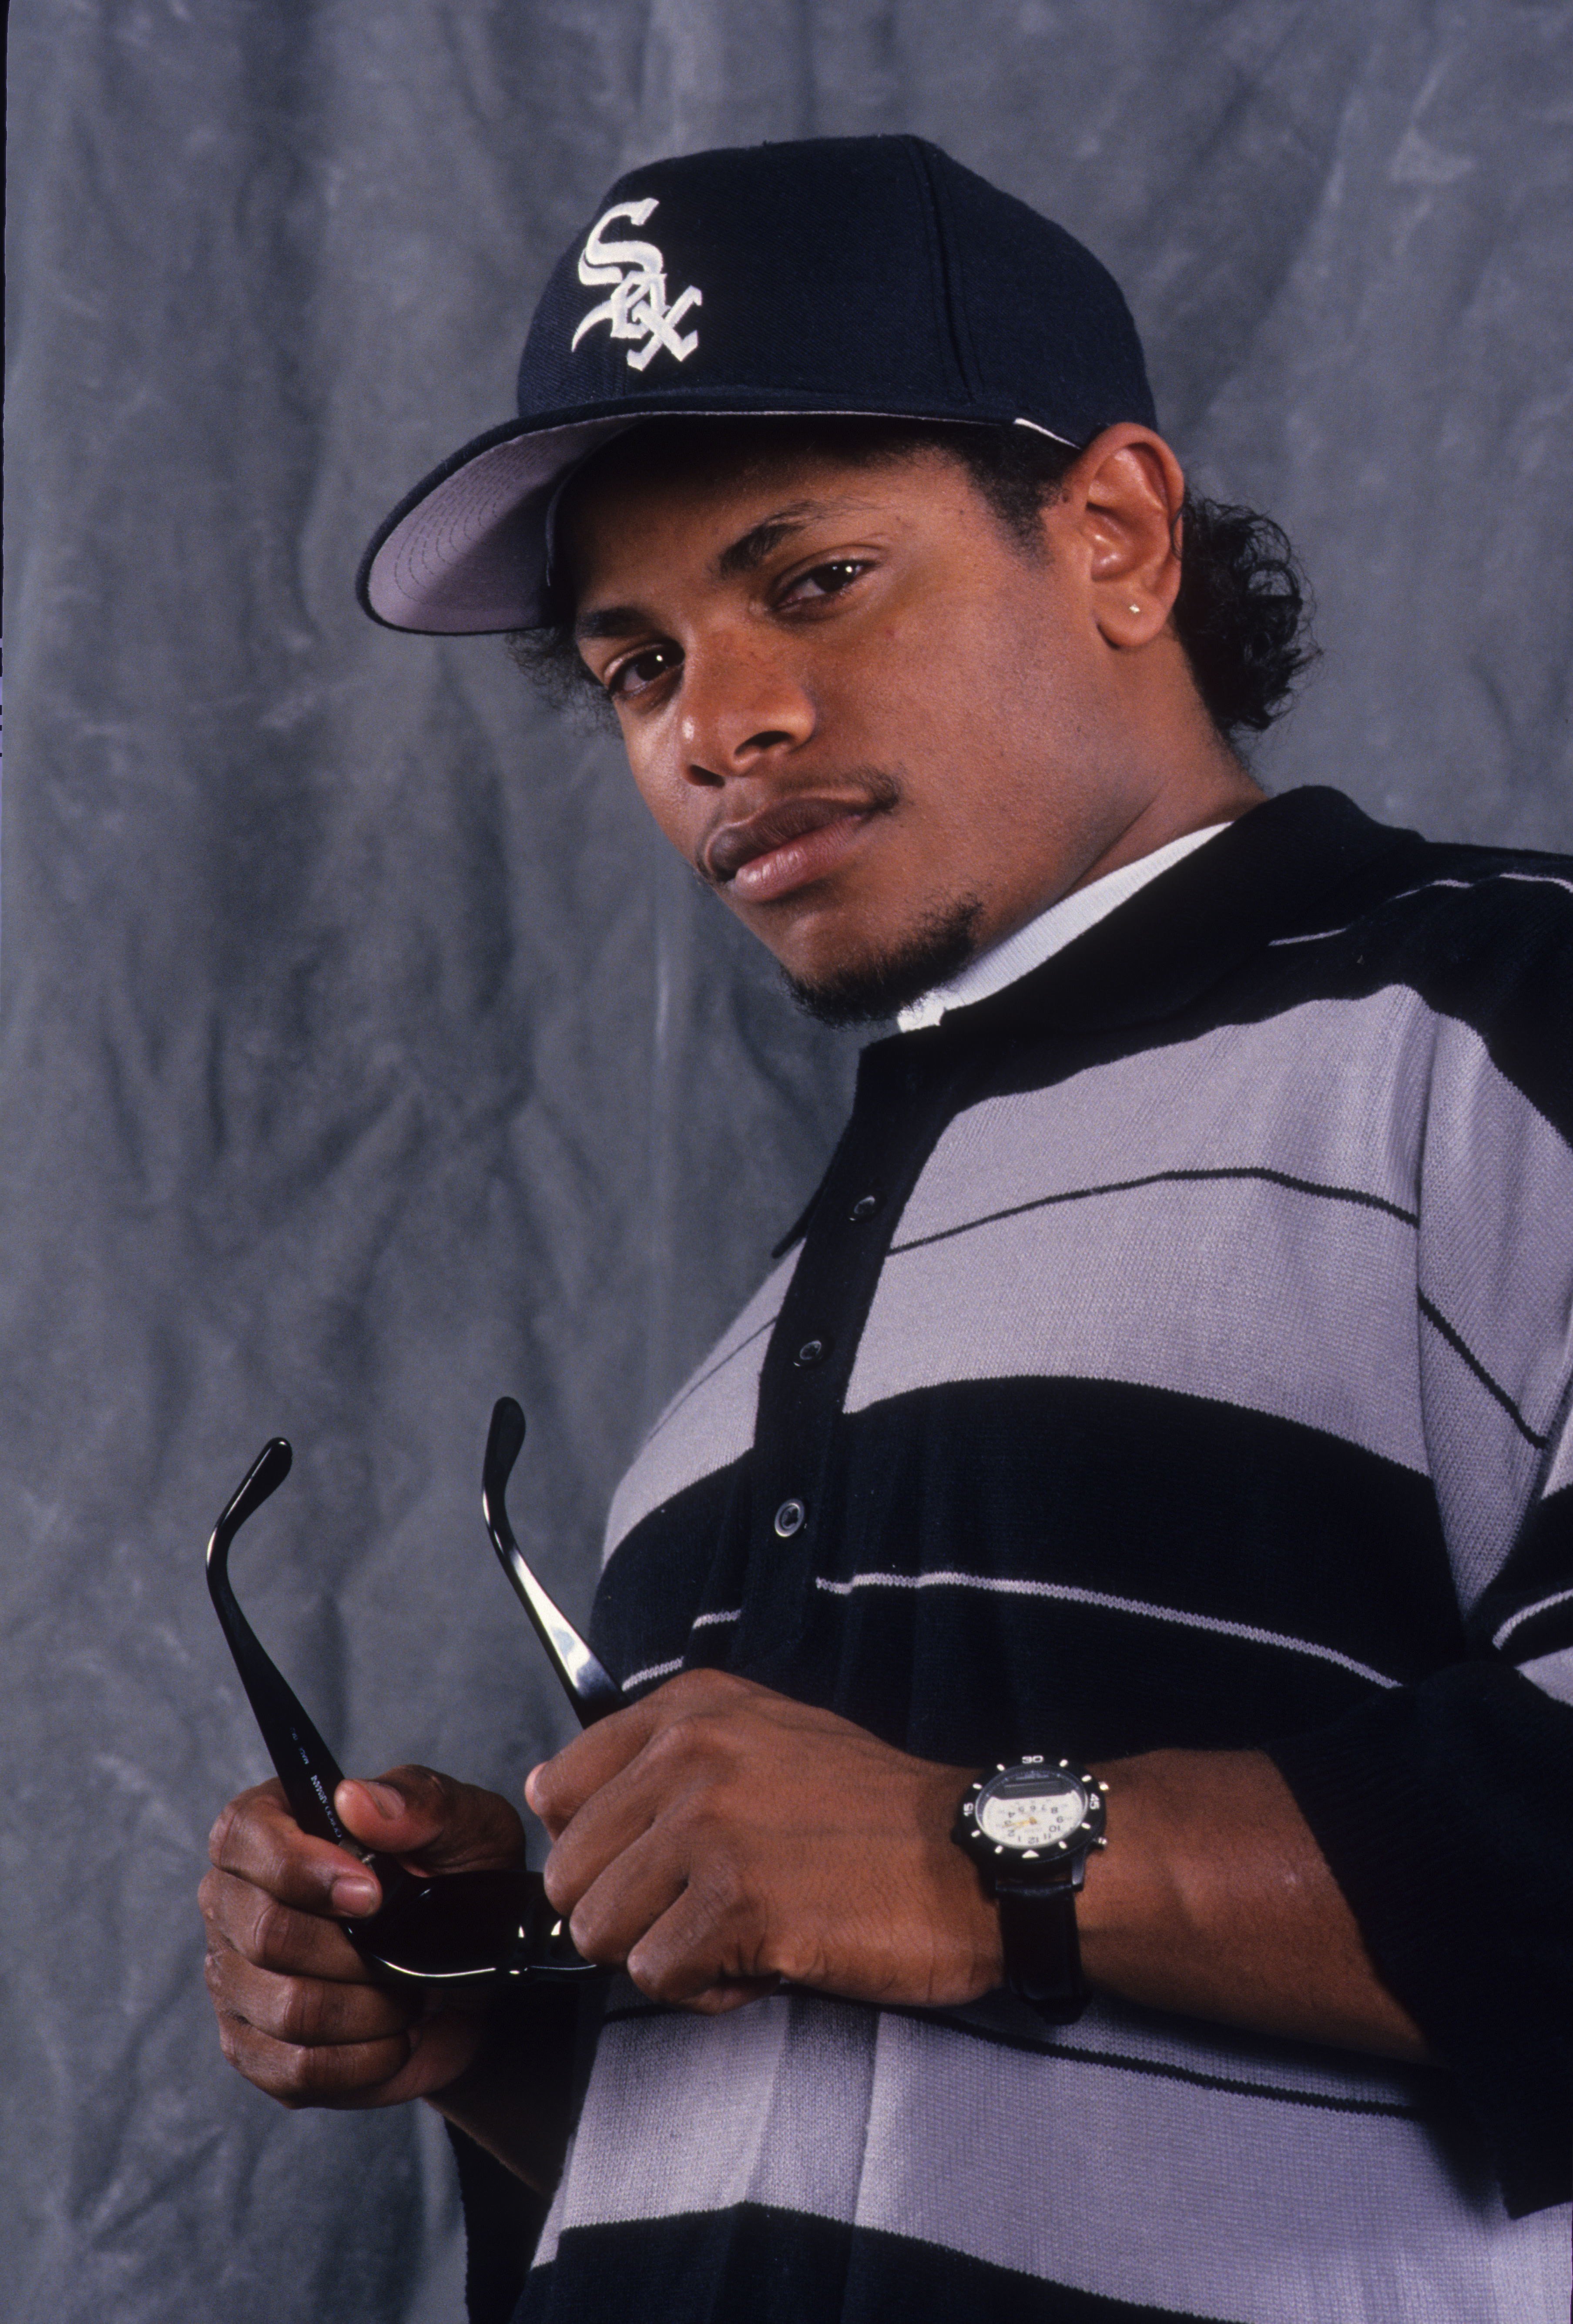 Eazy-E (Eric Wright) feuded with Dre after leaving the group, but the two reconciled prior to E's death in 1995.